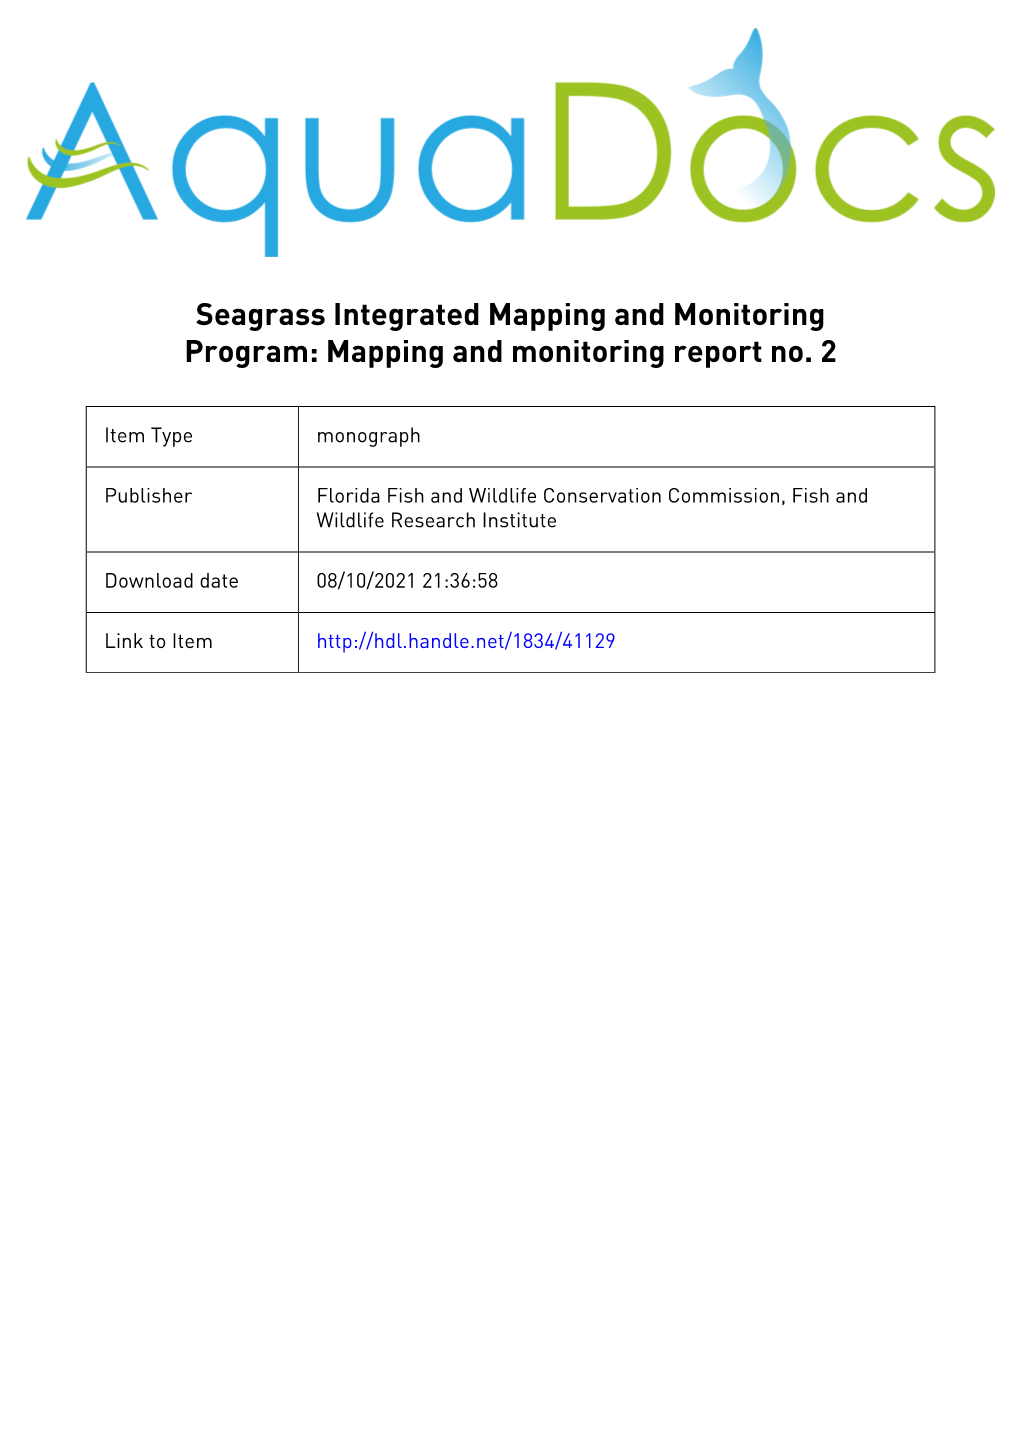 TECHNICAL REPORTSREPORTS Seagrass Integrated Mapping and Monitoring Program Mapping and Monitoring Report No